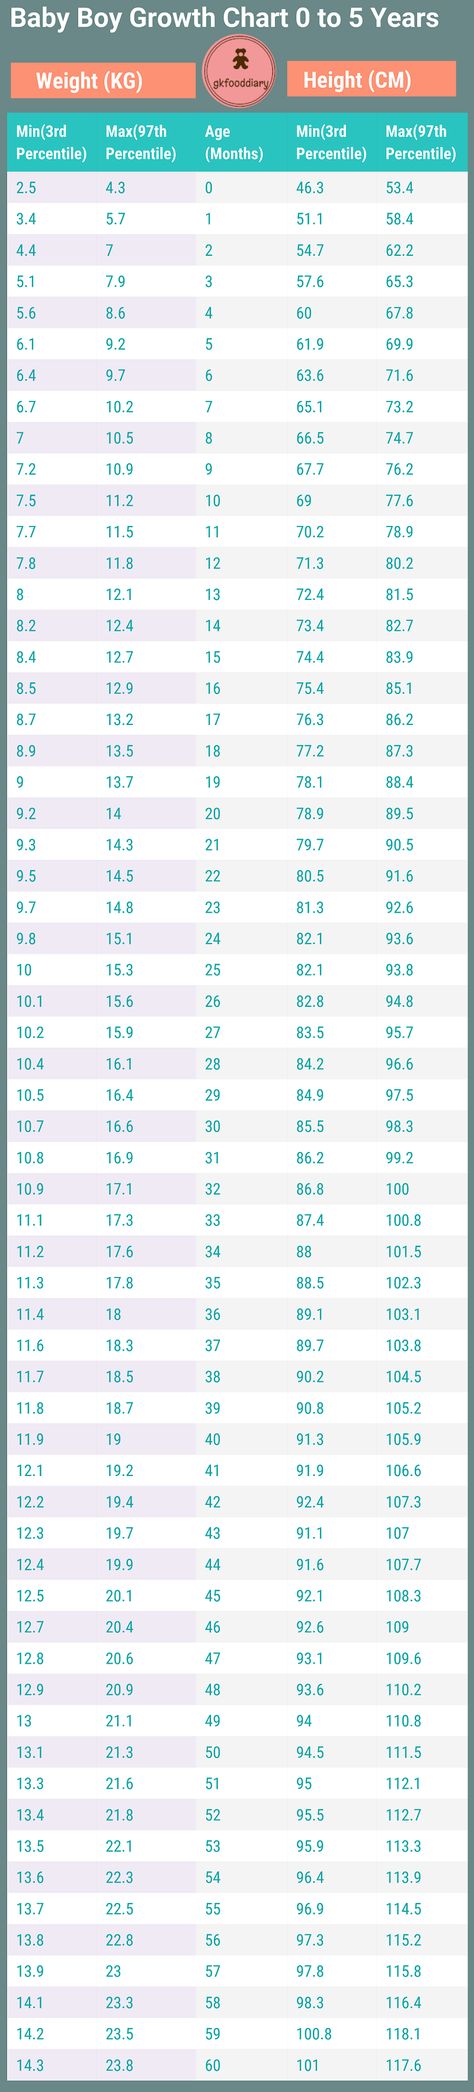 Indian Baby Boy growth chart 0 to 60 months Baby Boy Weight Chart, Baby Height Weight Chart, Baby Weight Chart, Baby Height Chart, Baby Boy Growth Chart, Baby Growth Chart, Baby Growth, Age Height Chart